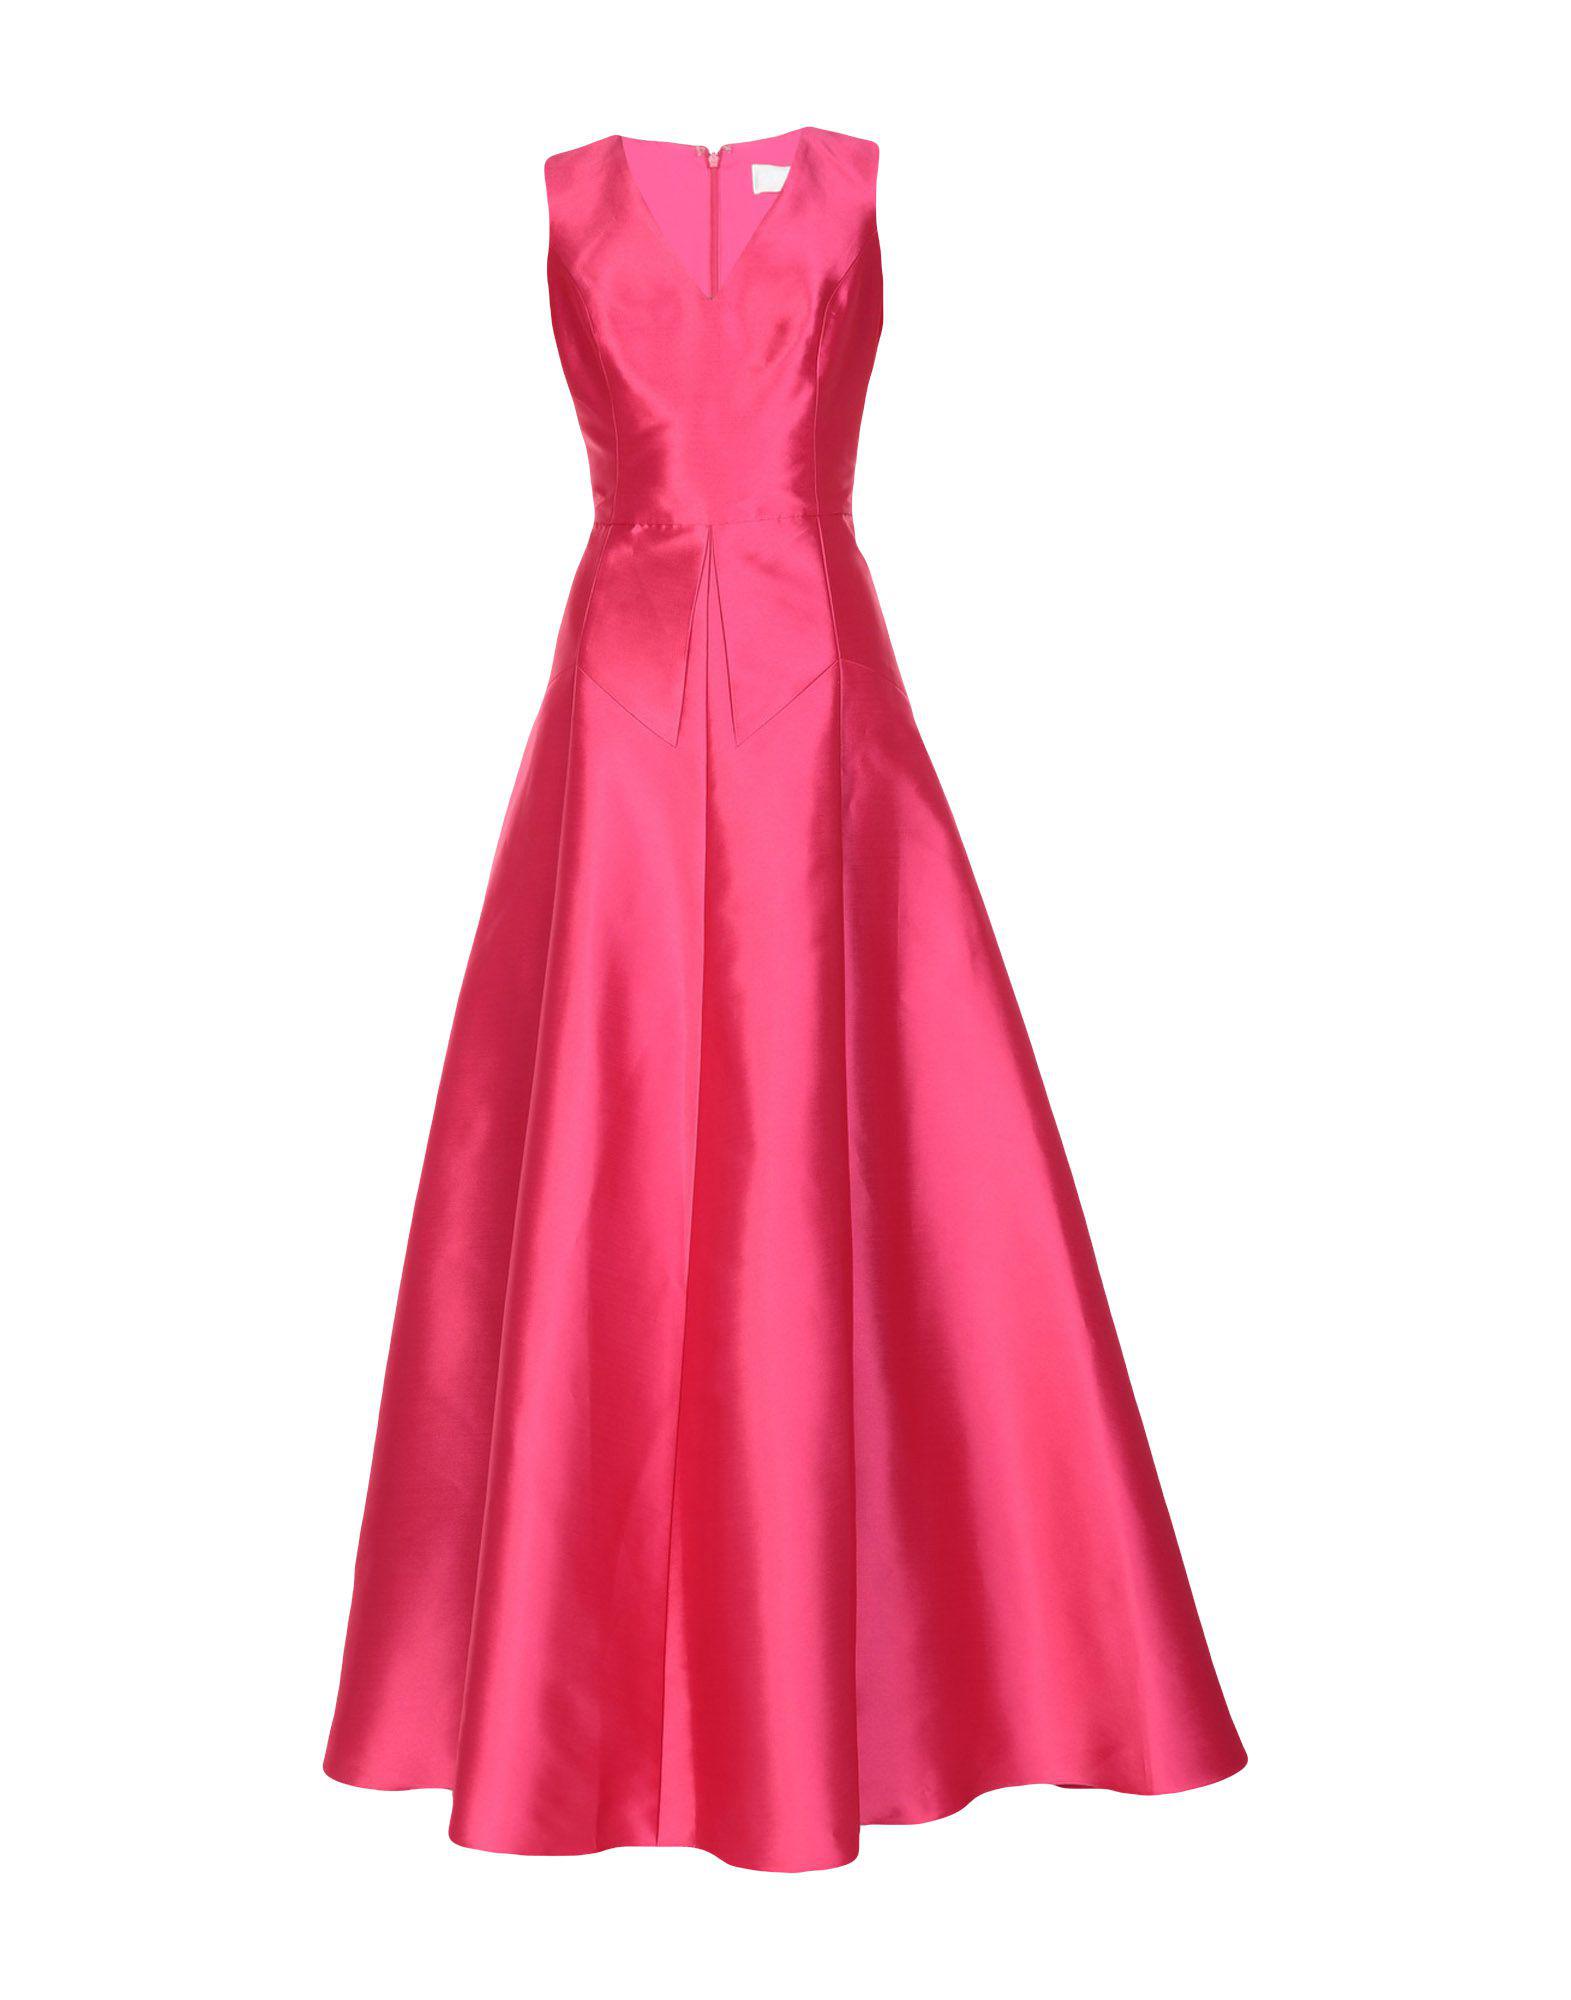 Mikael Aghal Satin Long Dress in Fuchsia (Pink) - Lyst